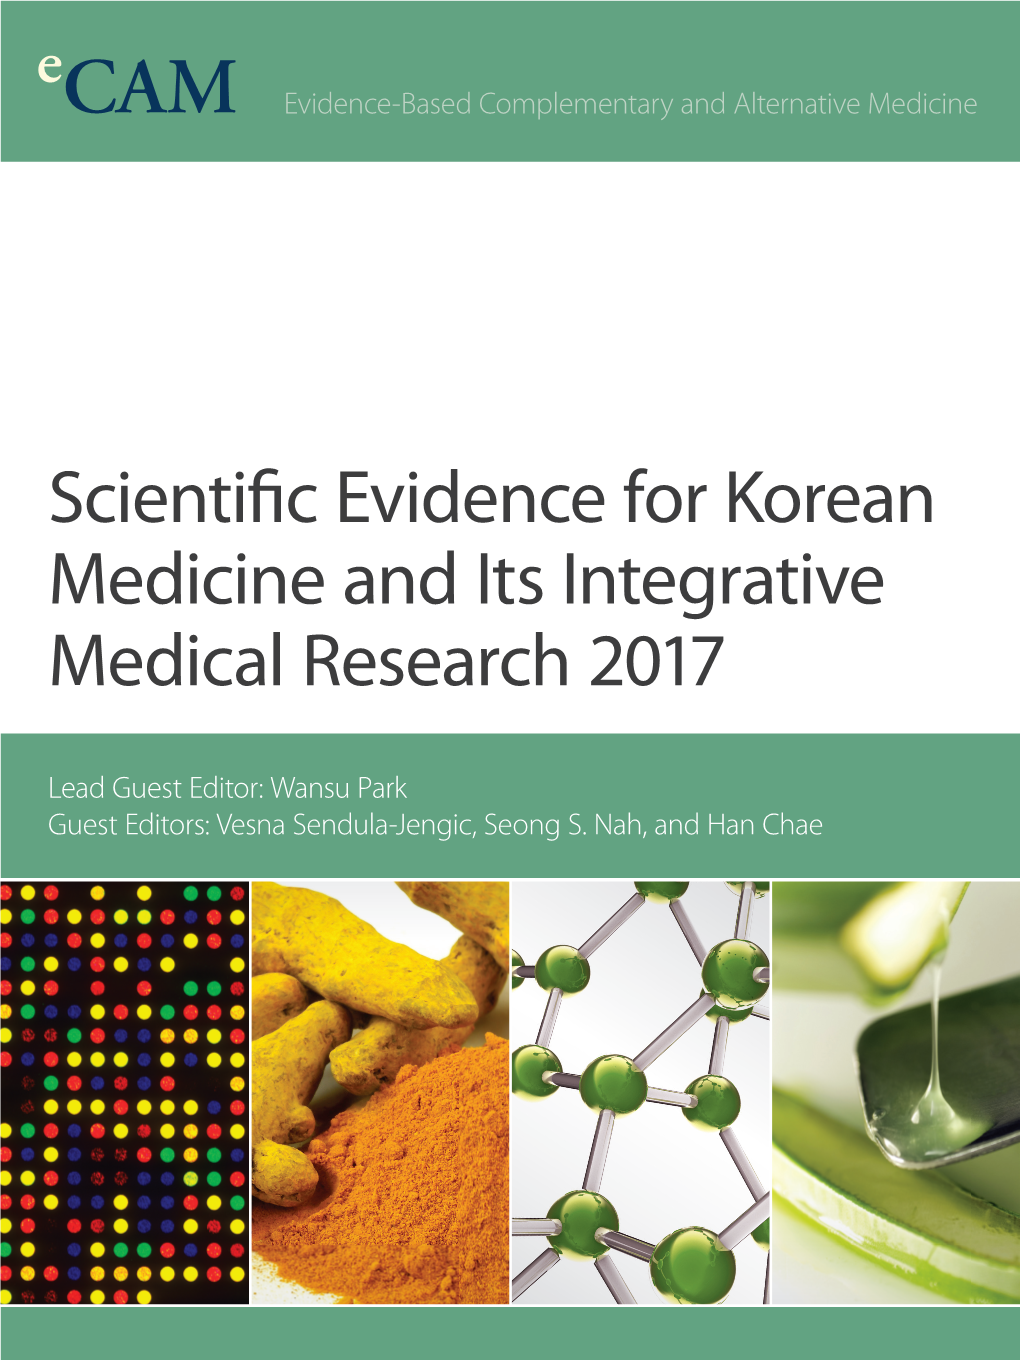 Scientific Evidence for Korean Medicine and Its Integrative Medical Research 2017